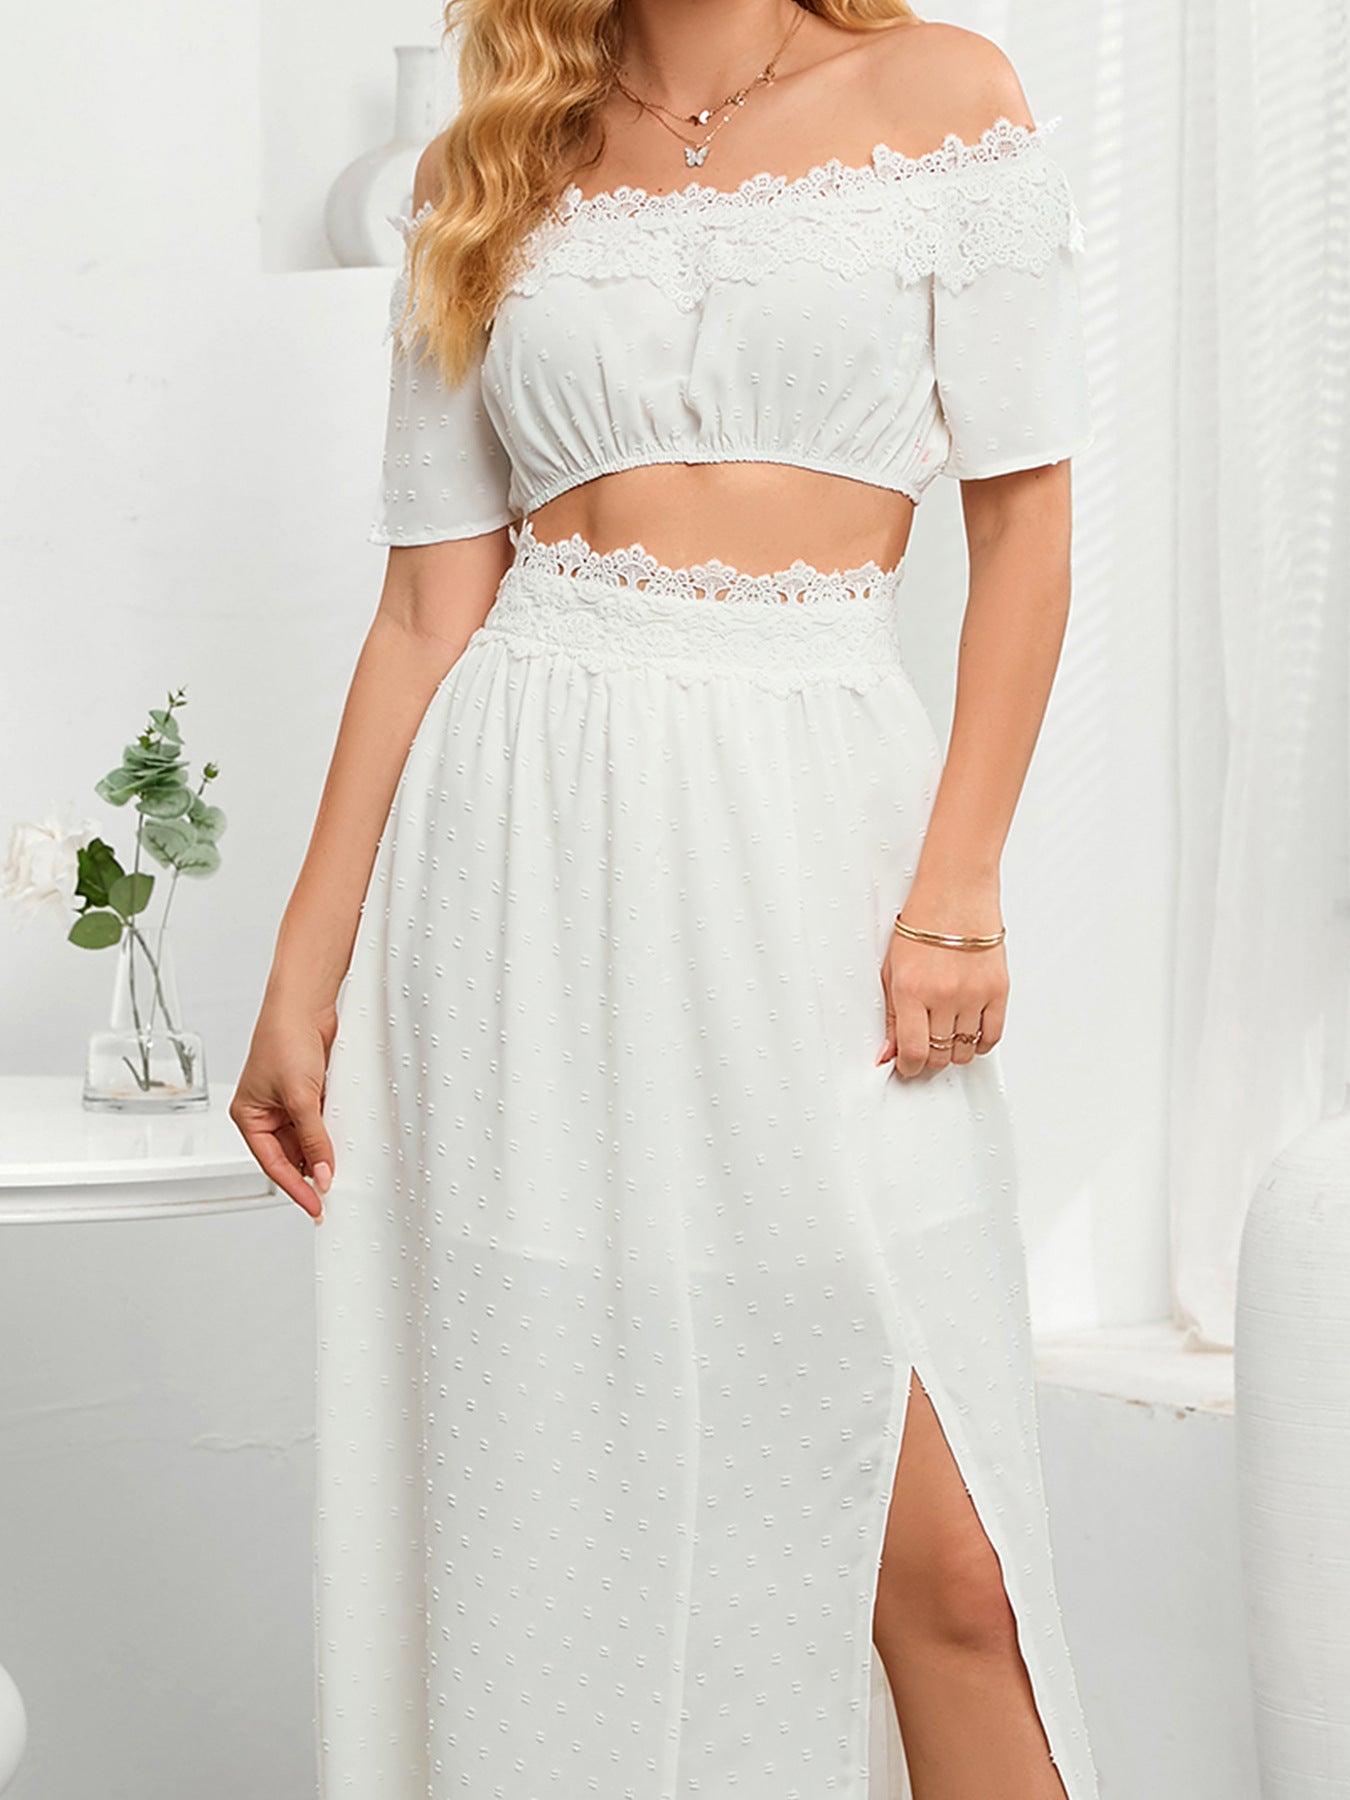 Women's Off-shoulder Short-sleeved Top With Lace Lining